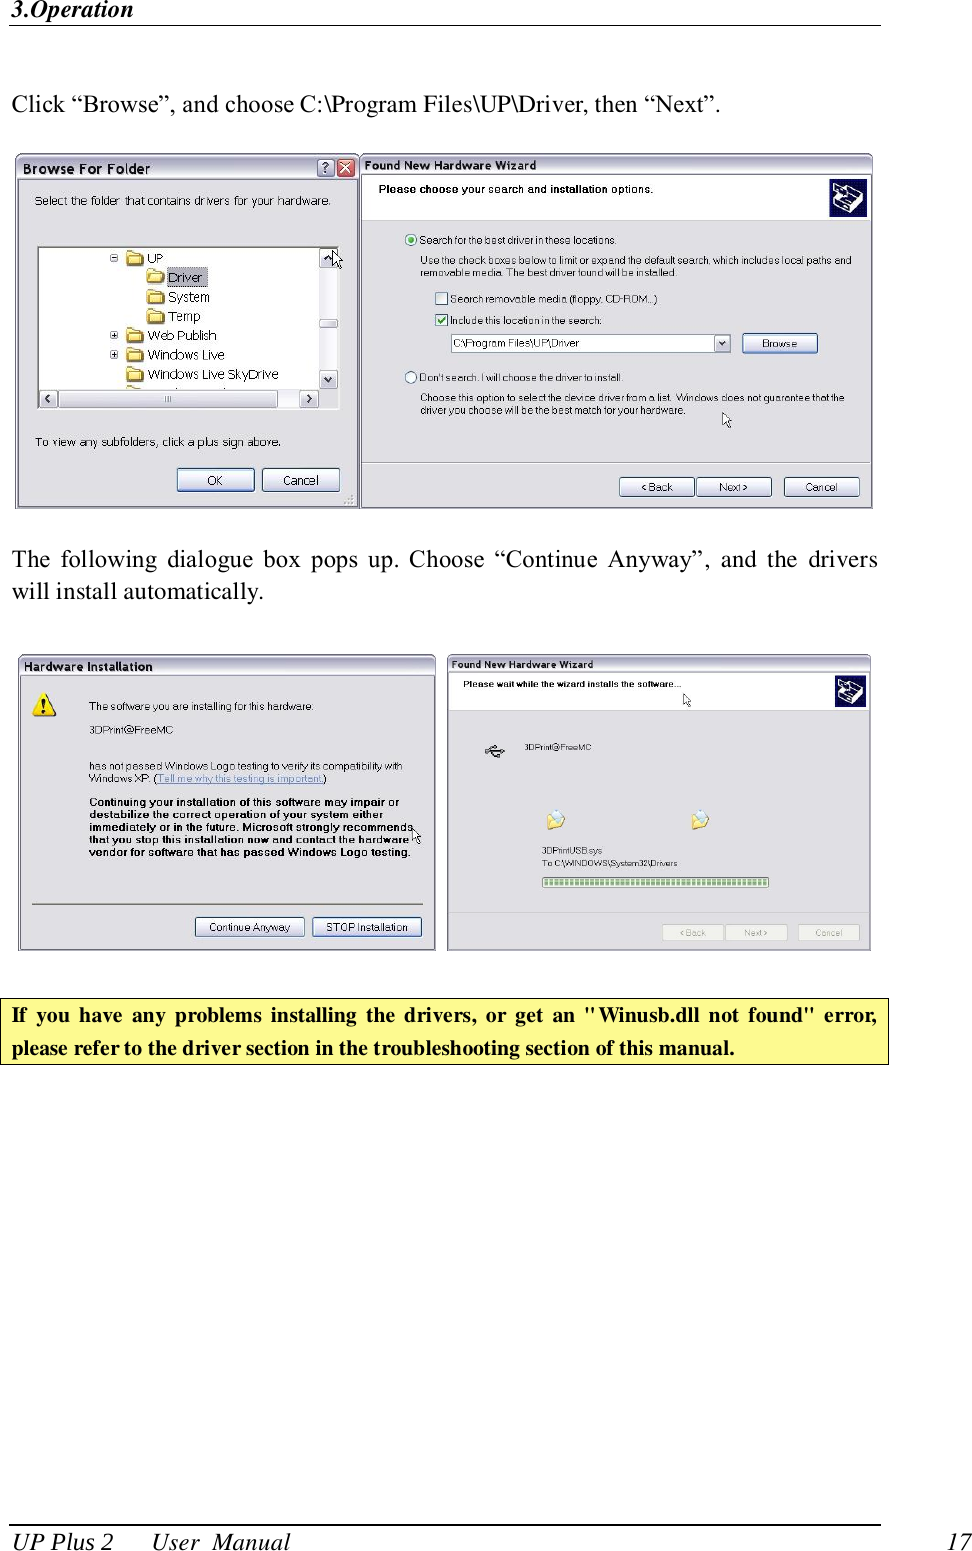 3.Operation UP Plus 2      User  Manual                                17  Click ―Browse‖, and choose C:\Program Files\UP\Driver, then ―Next‖.    The  following  dialogue  box  pops  up.  Choose  ―Continue  Anyway‖, and  the  drivers will install automatically.      If  you  have  any problems  installing  the  drivers, or get an &quot;Winusb.dll  not  found&quot; error, please refer to the driver section in the troubleshooting section of this manual.  